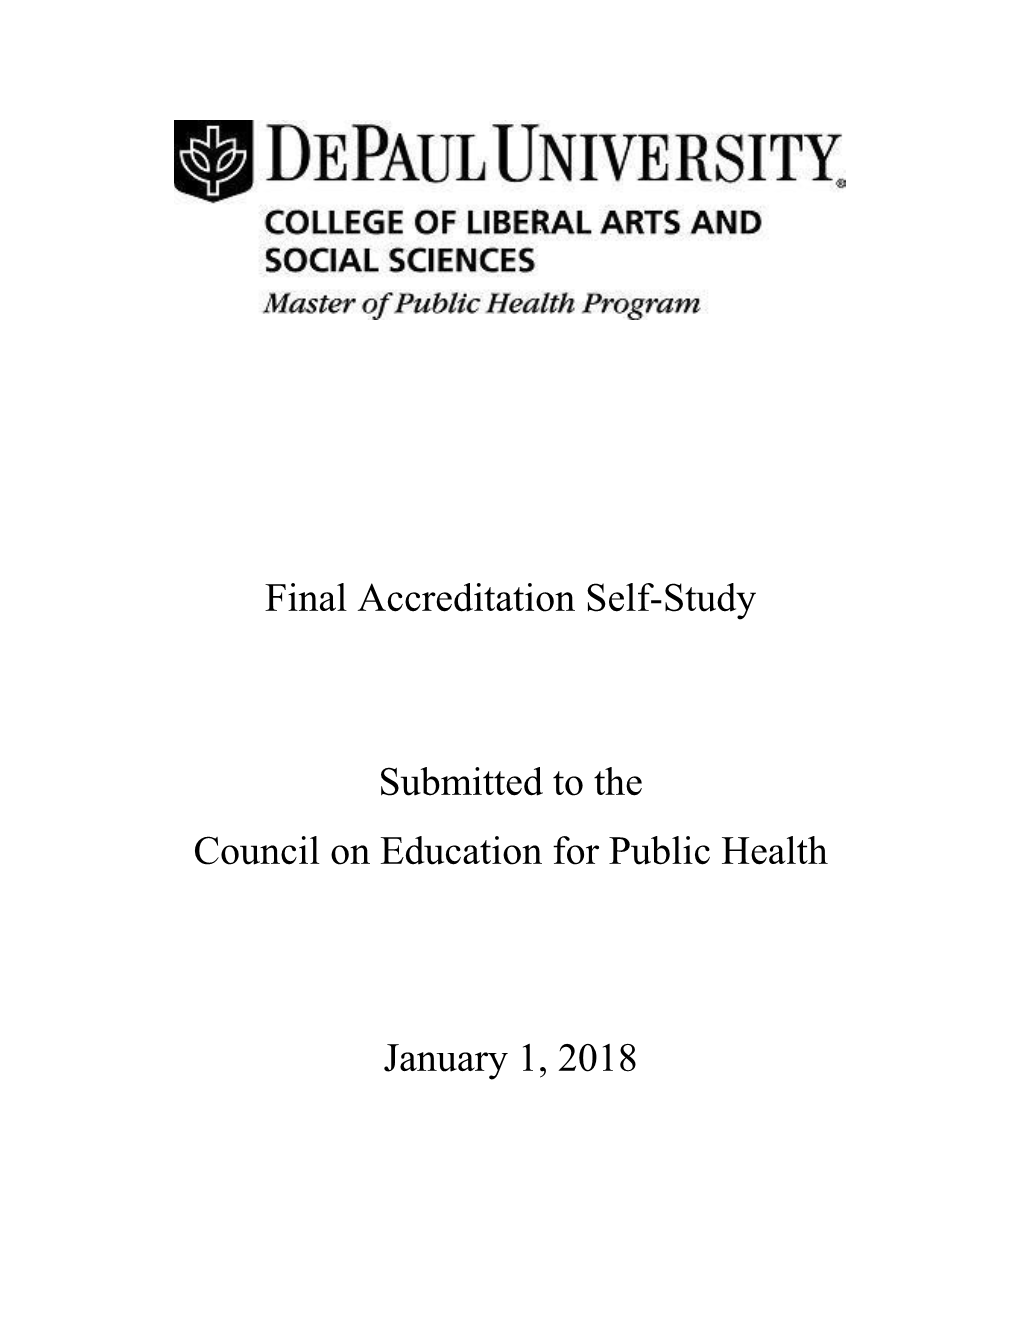 Final Accreditation Self-Study Submitted to the Council On